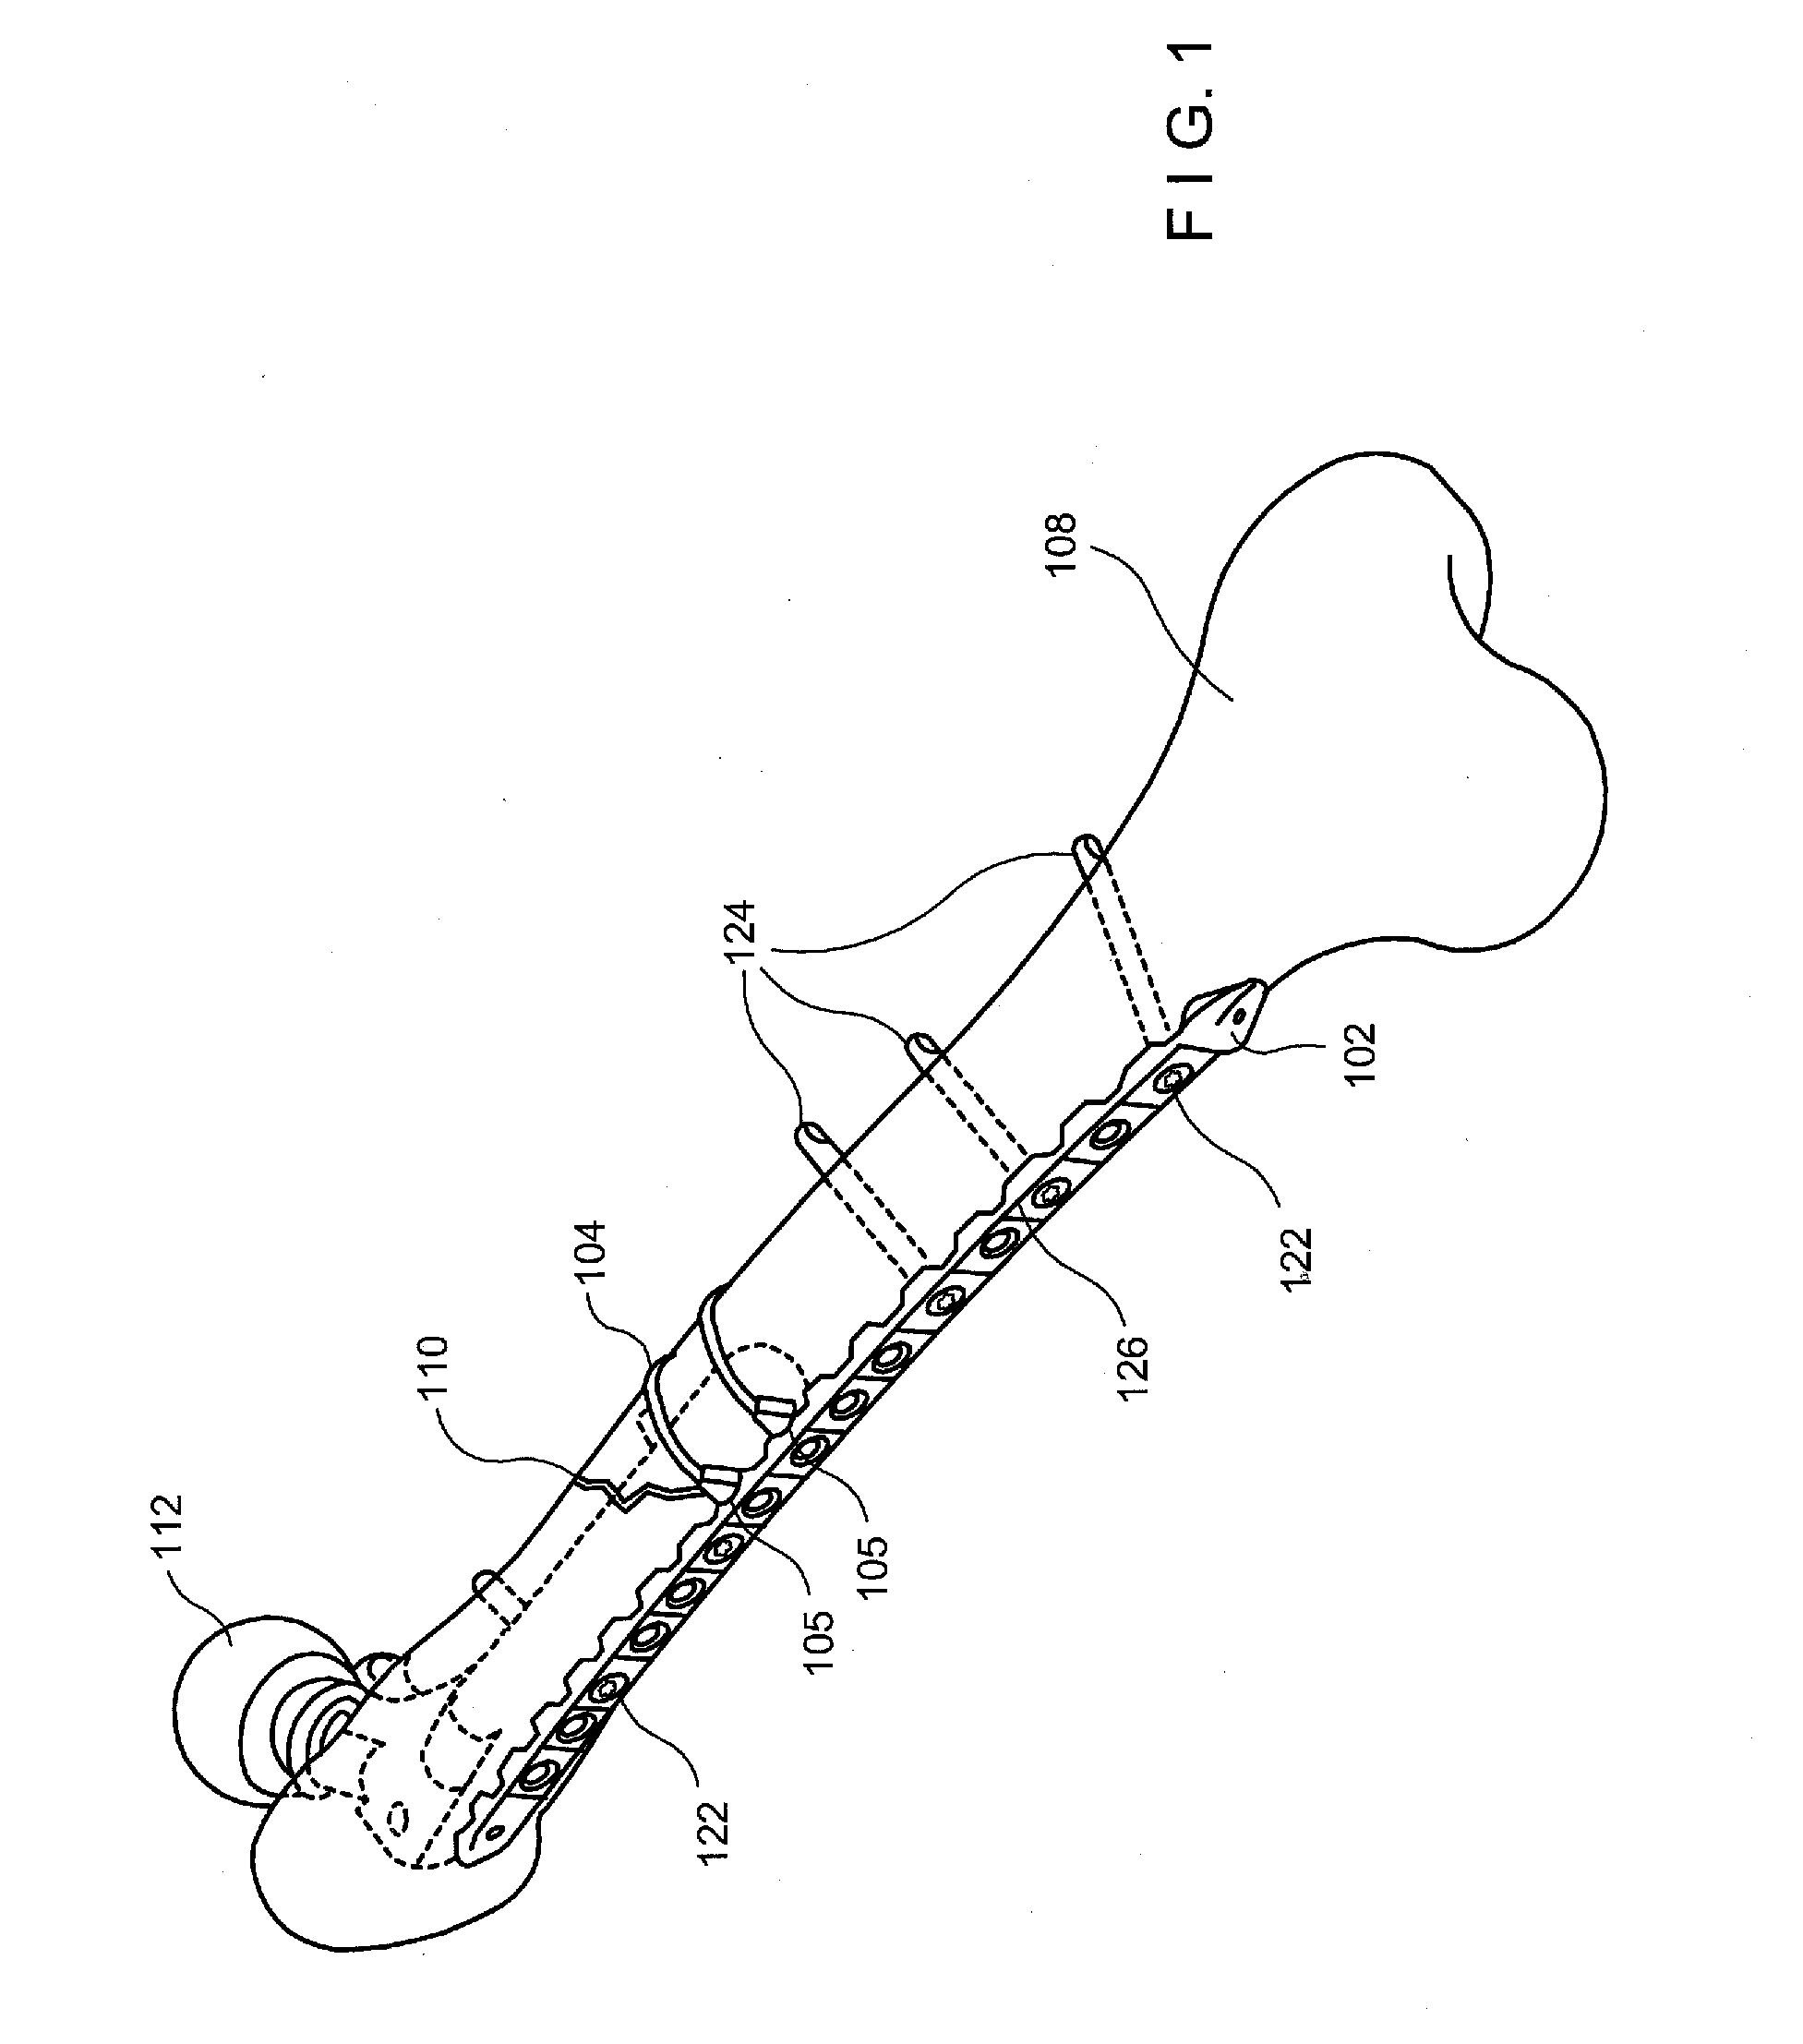 Minimally Invasive Implant and Crimping System